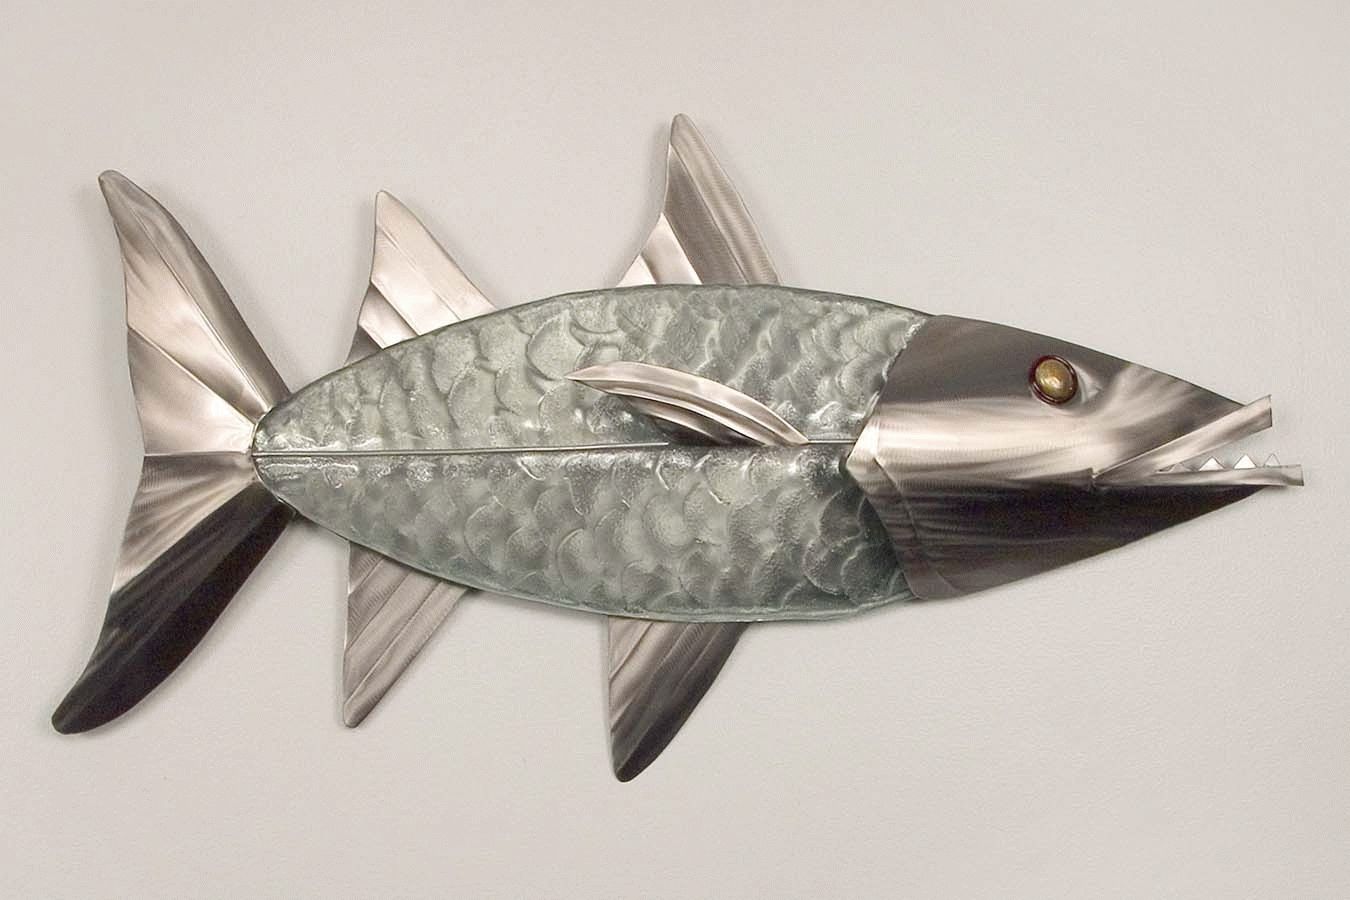 Barracuda Glass And Metal Pertaining To Most Up To Date Glass And Metal Wall Art (View 15 of 20)